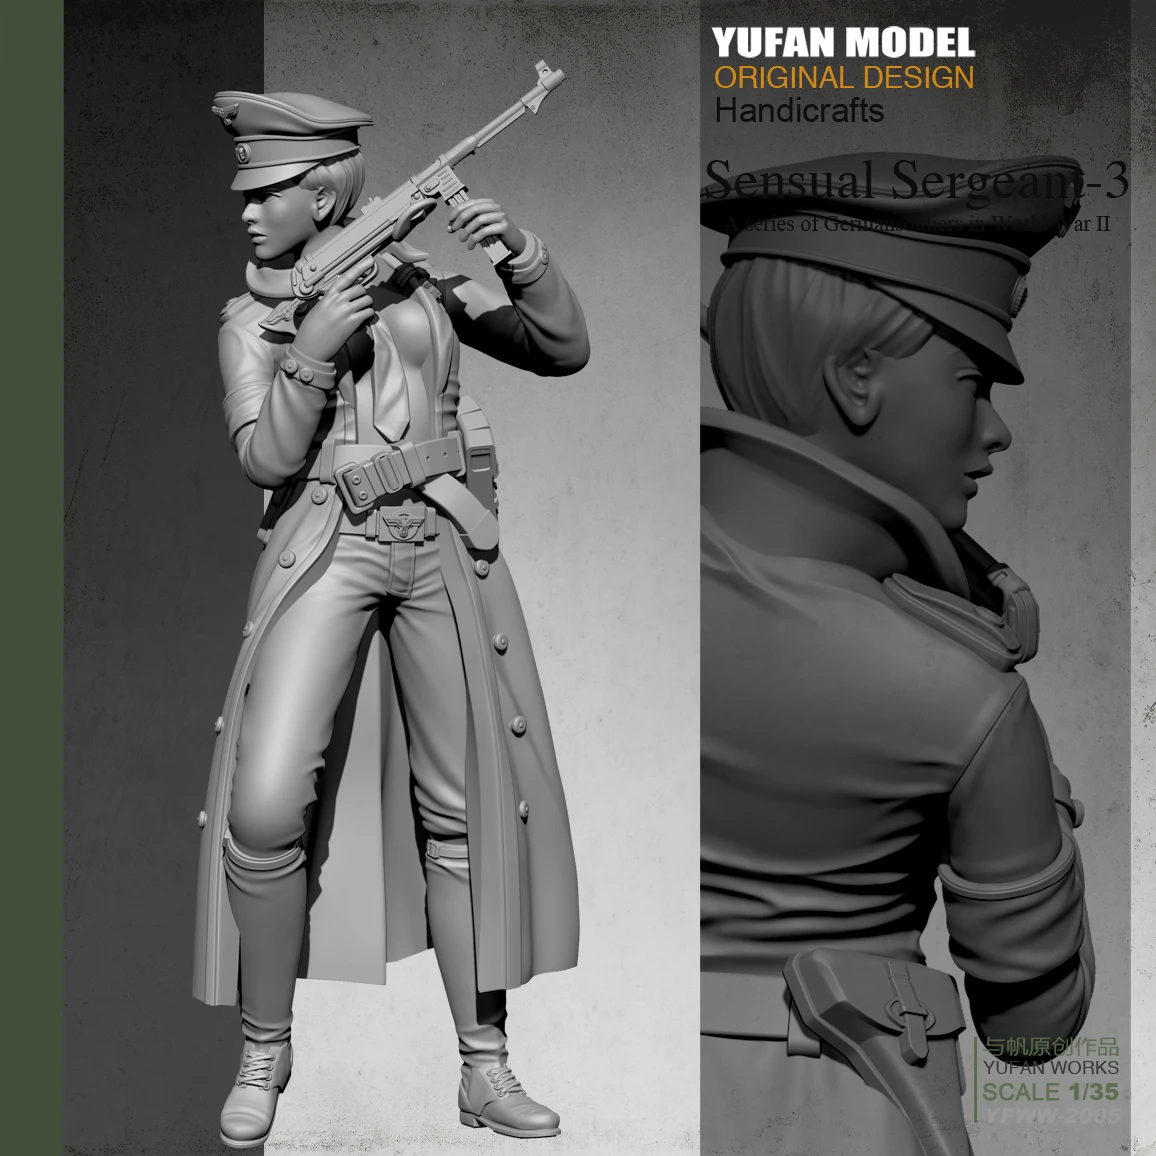 Details about   1/35 Armed Female Soldier Officer Resin Figure Model Kit Unassembled Unpainted 